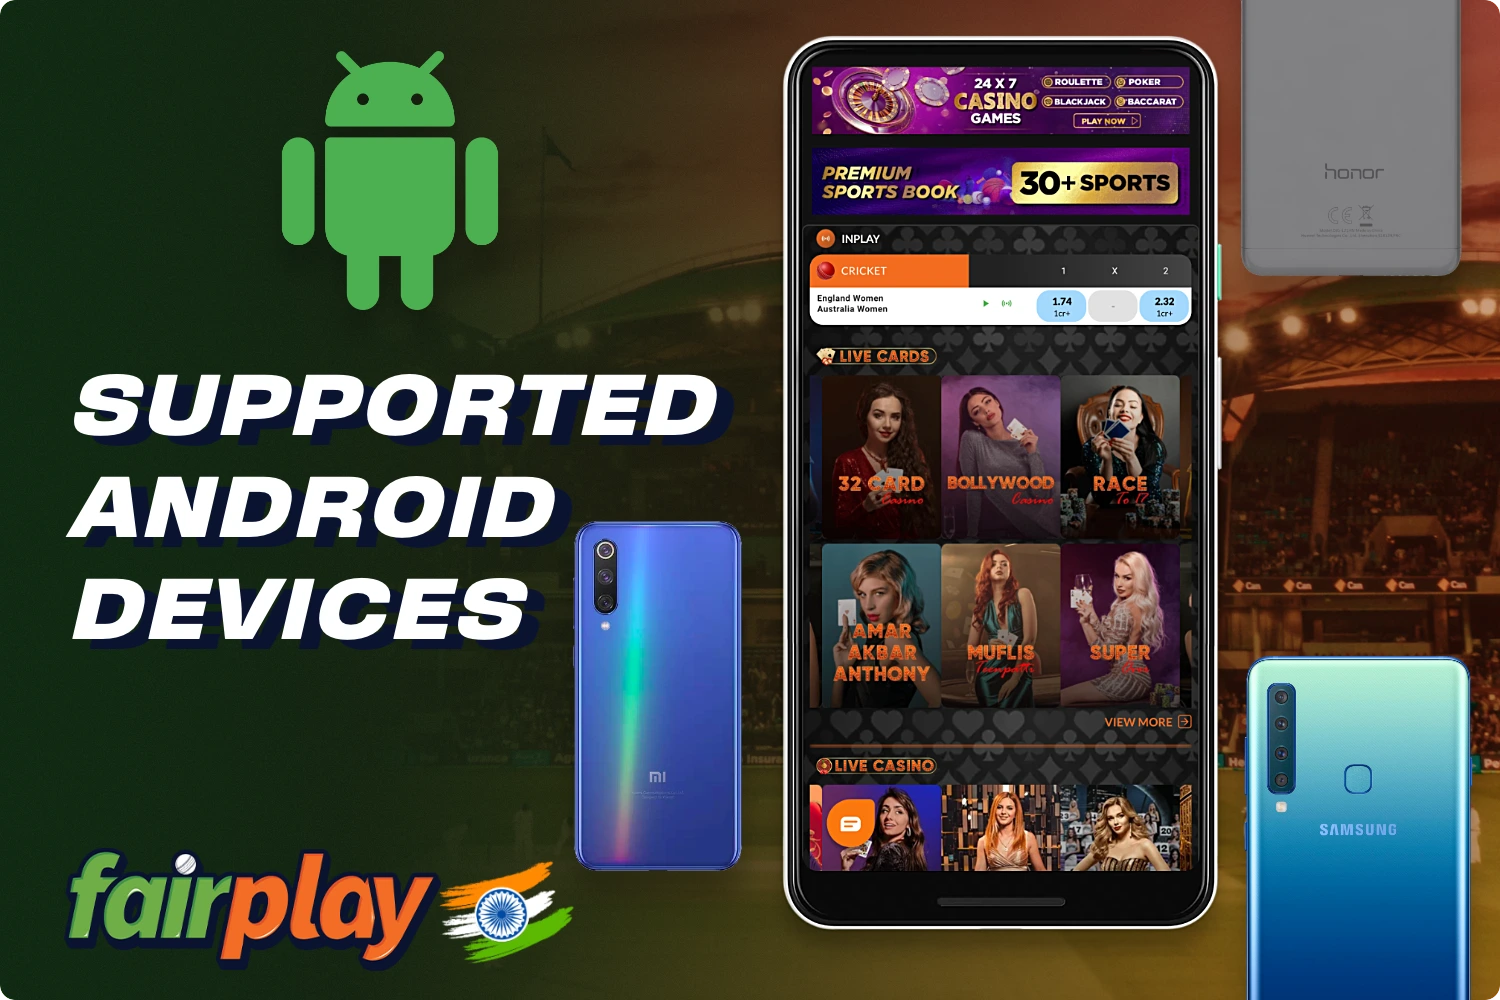 The Fairplay mobile app is supported by all known Android smartphone manufacturers